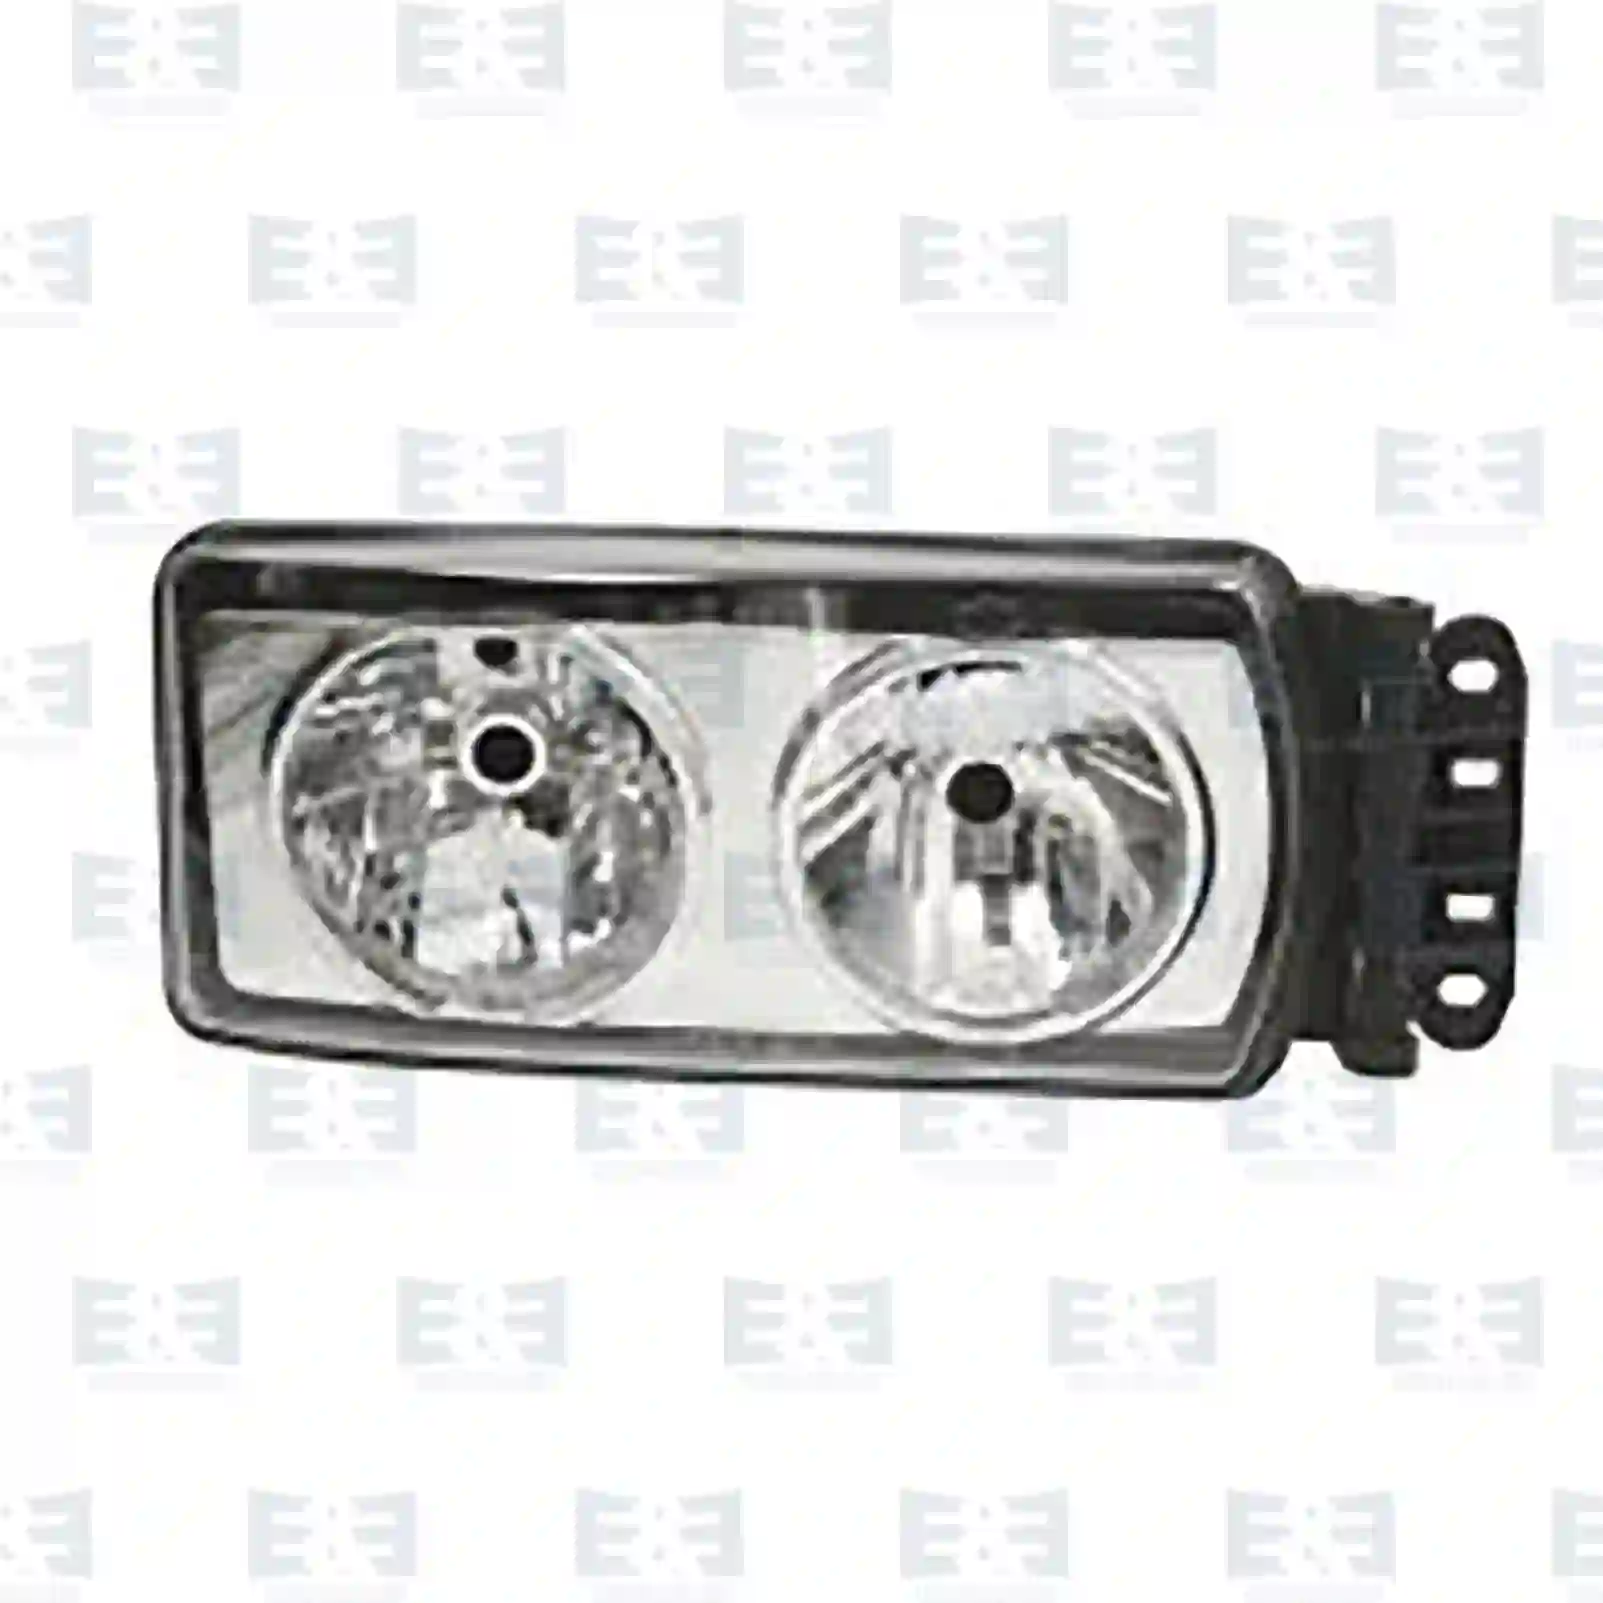 Headlamp, right, without adjusting motor, 2E2290310, 504238203, , , ||  2E2290310 E&E Truck Spare Parts | Truck Spare Parts, Auotomotive Spare Parts Headlamp, right, without adjusting motor, 2E2290310, 504238203, , , ||  2E2290310 E&E Truck Spare Parts | Truck Spare Parts, Auotomotive Spare Parts